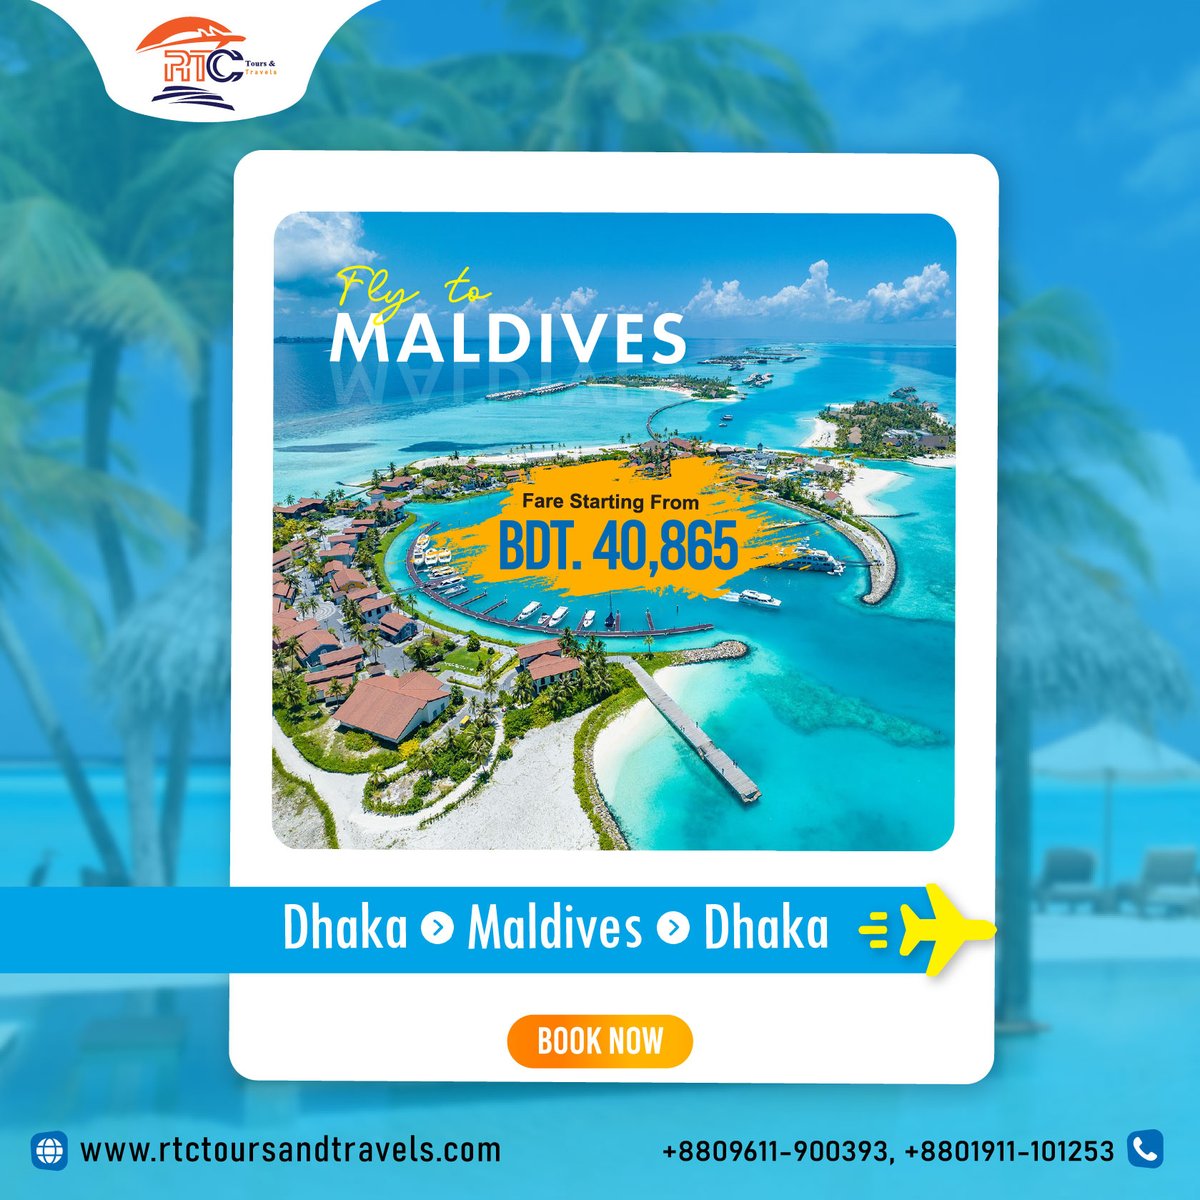 💢 Travel At The Best Rate With RTC Tours & Travels
🔻 SPECIAL AIRFARE FROM (DHAKA TO MALDIVES) Return Air Ticket
To Book Your Ticket and Contact with Us:-
#tourbd #pattaya #domestic #chaina #UsBangla #ইউএসবাংলা #travelagency #Rtctoursandtravels #hongkong #Dhaka #qatarairways